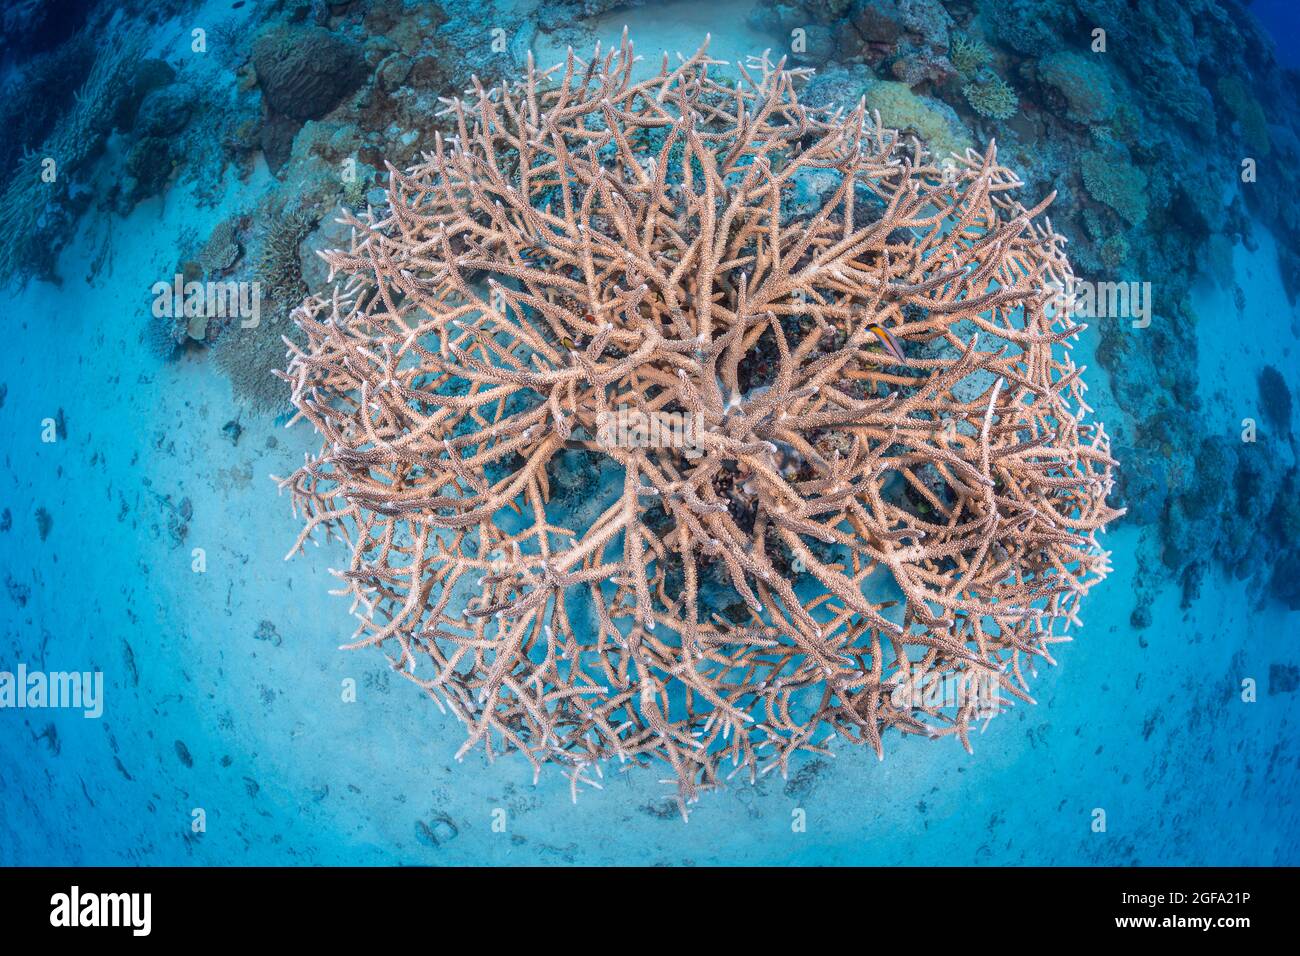 A view looking straight down on a colony of delicate stony coral, Acropora acuminata, Fiji. Stock Photo